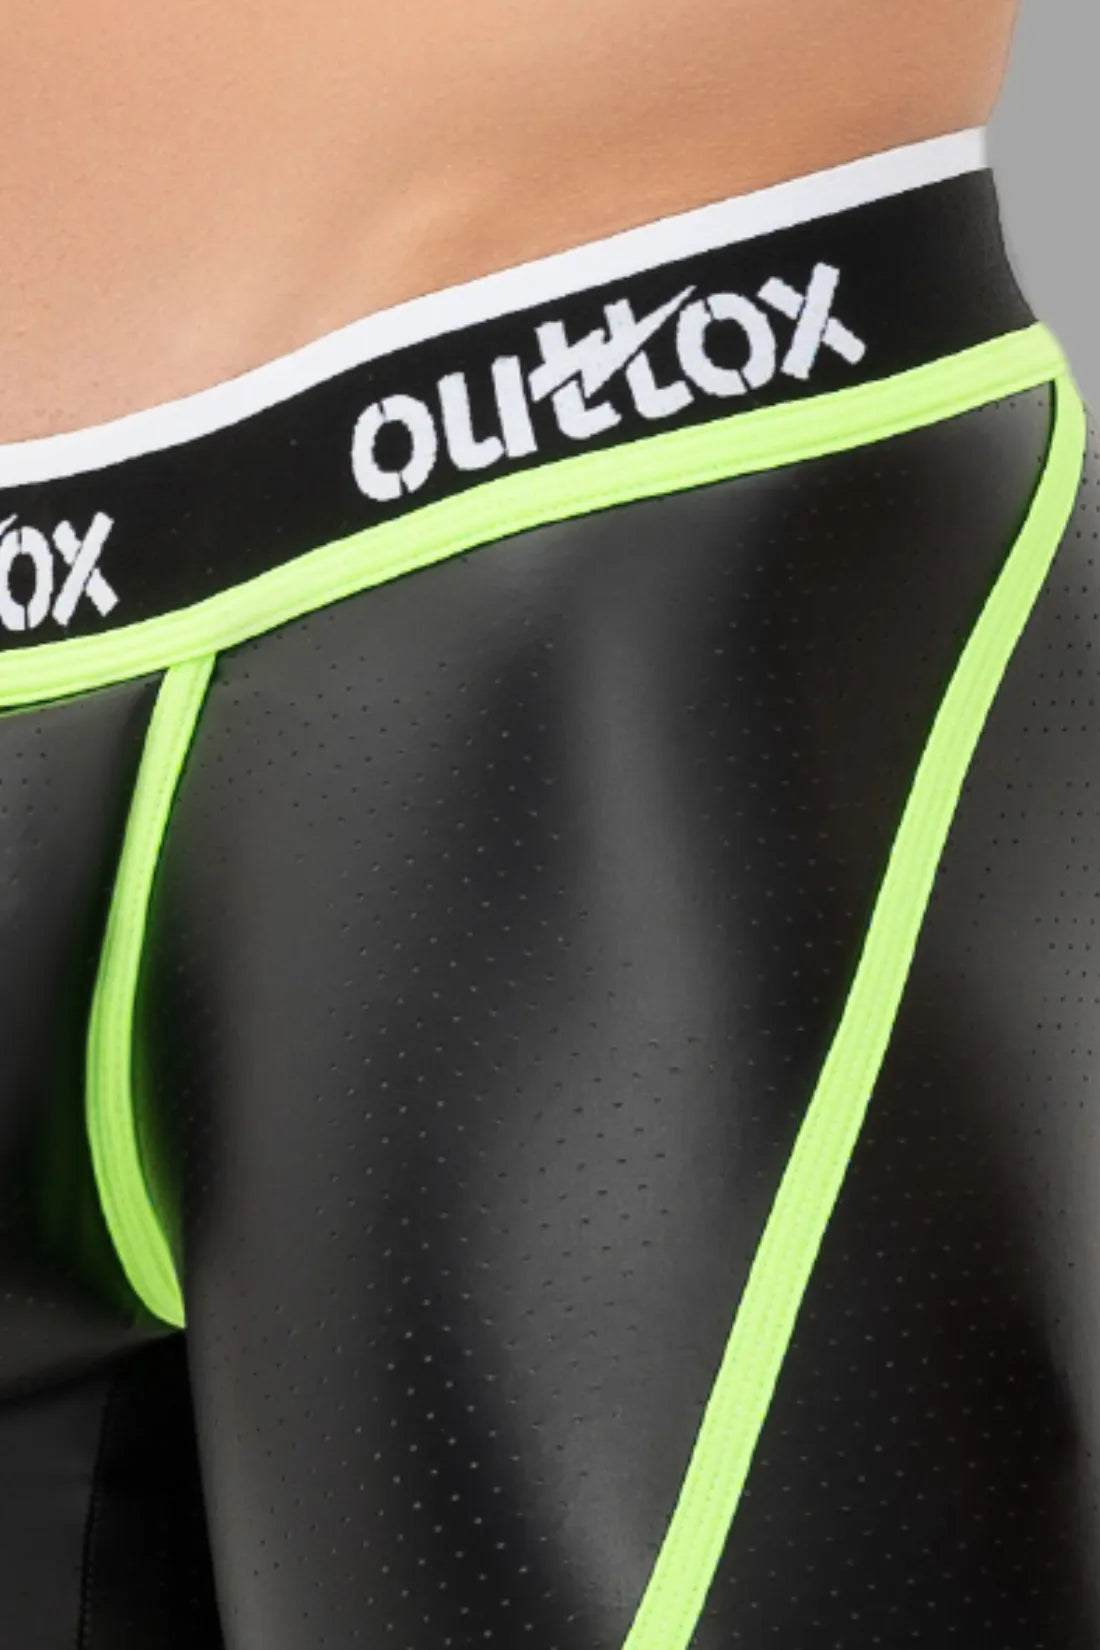 Outtox. Open Rear Shorts with Snap Codpiece. Black and Green &